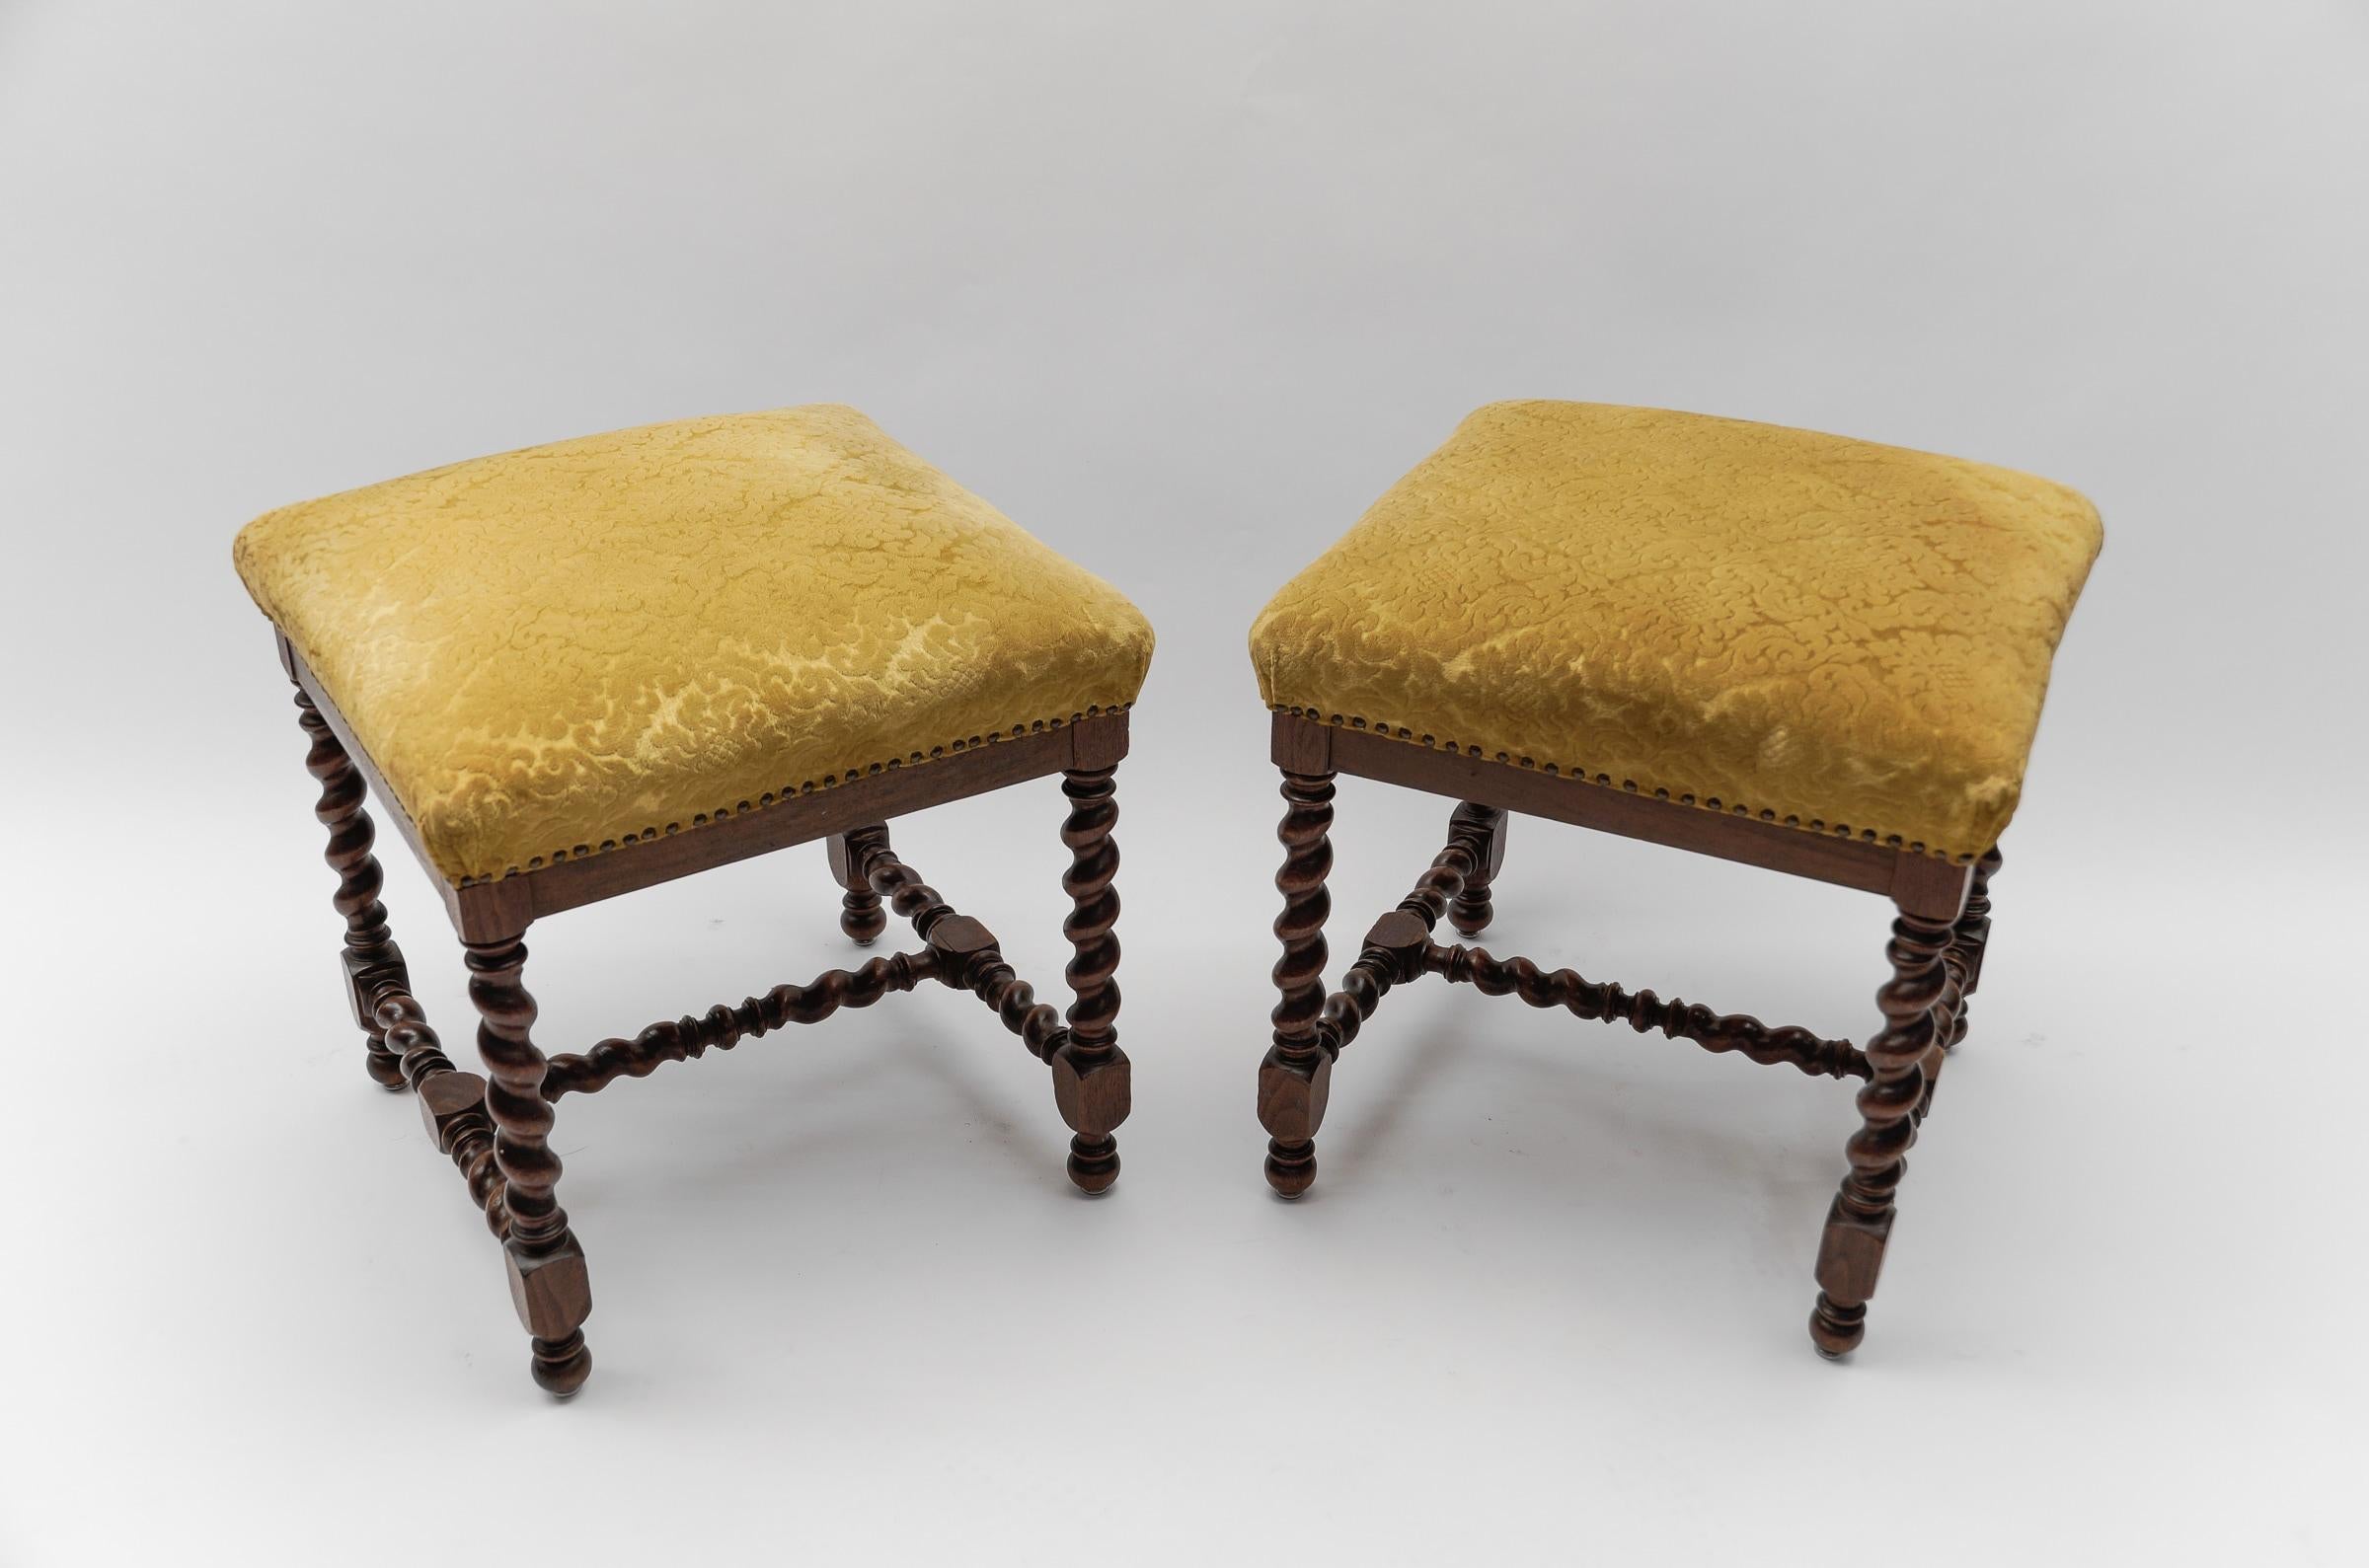 Two French Barley Wood Stools in Louis XIII Style, ca. 1870s For Sale 5